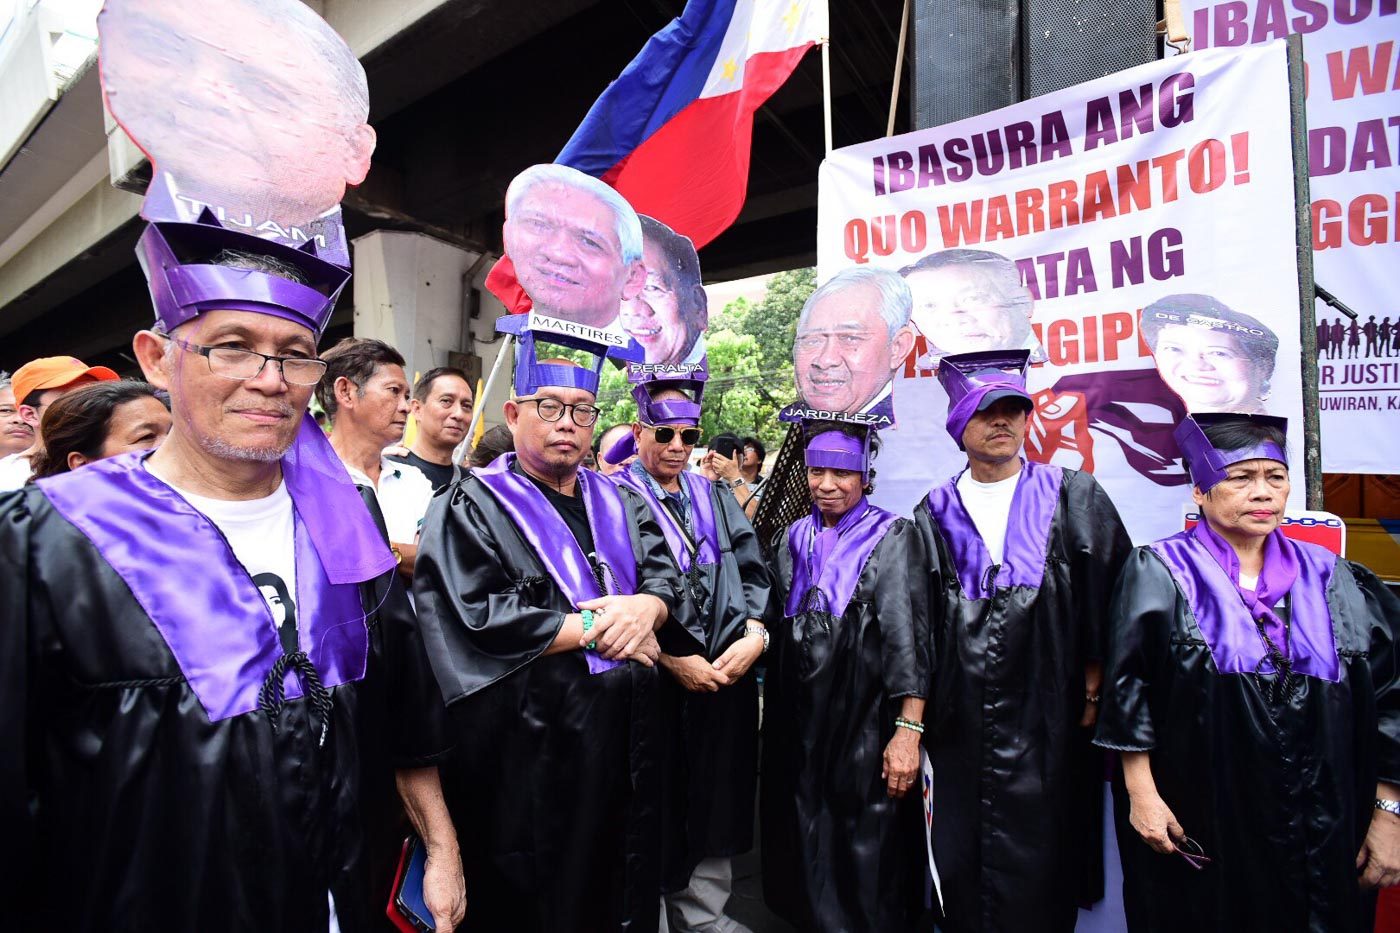 With Sereno ouster, SC committed ‘hara kiri’ on judiciary’s independence – lawmakers